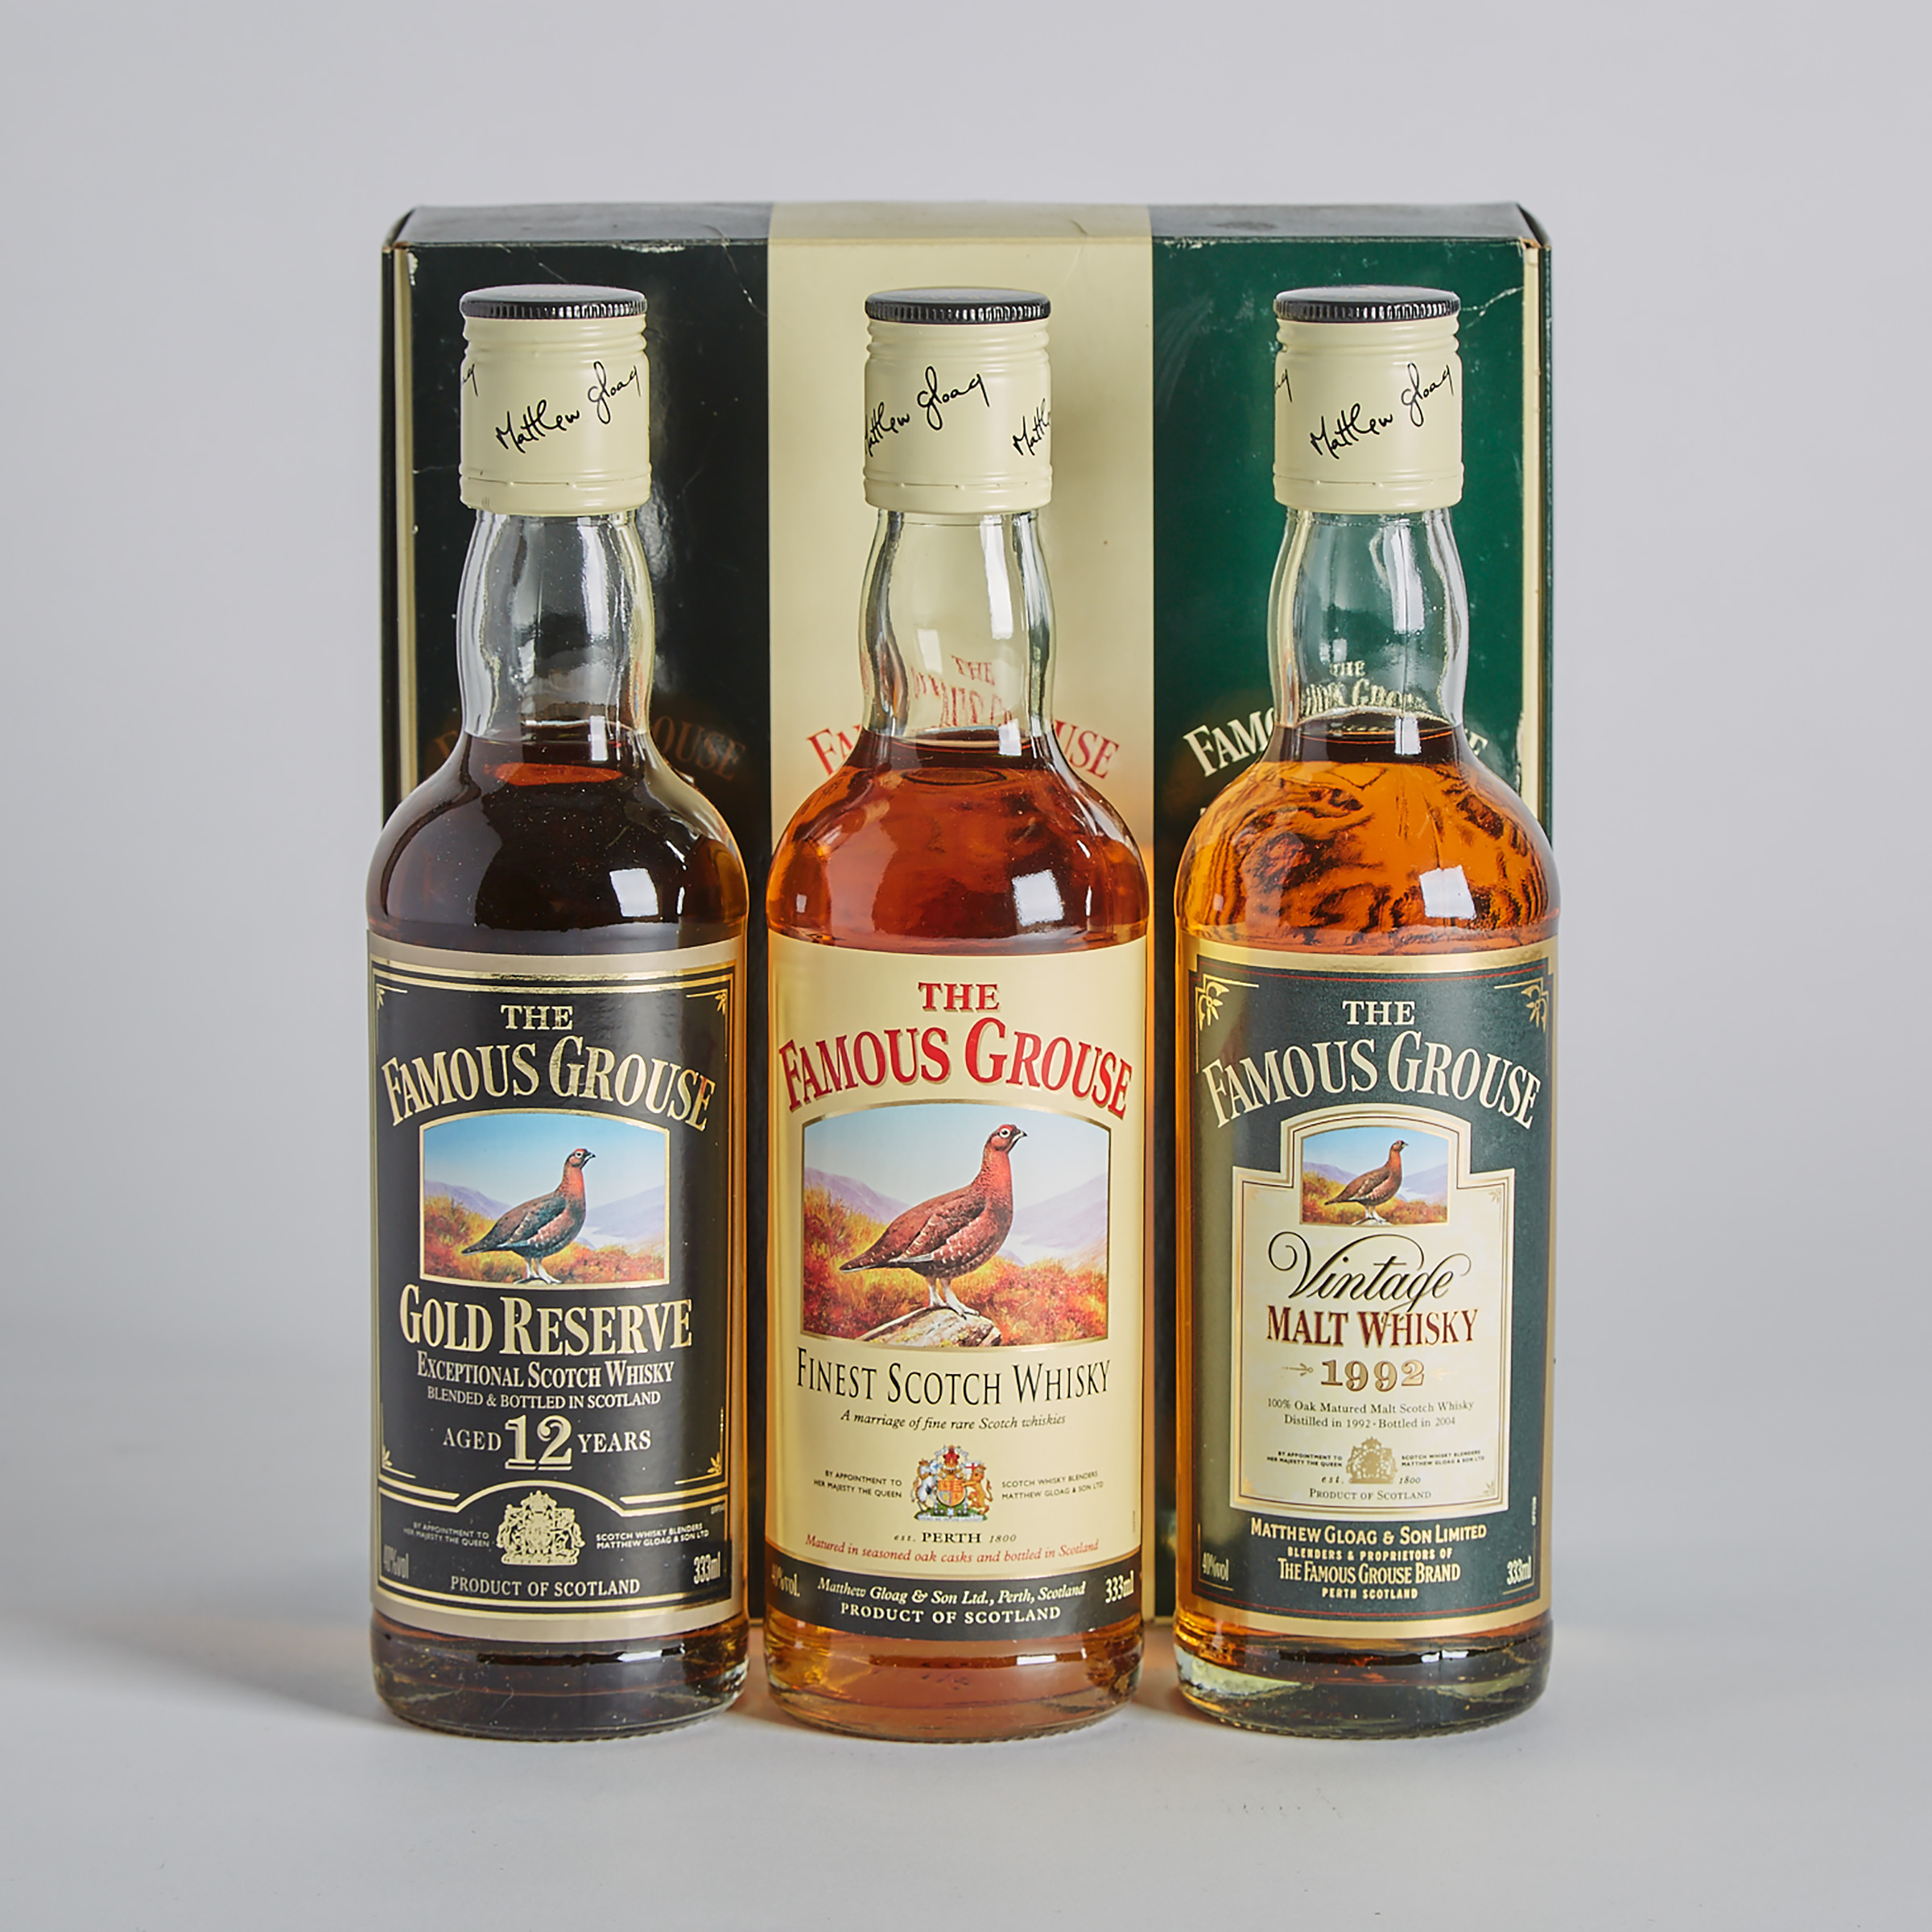 FAMOUS GROUSE FINEST SCOTCH WHISKY NAS (ONE 333 ML)
FAMOUS GROUSE GOLD RESERVE SCOTCH WHISKY 12 YEARS (ONE 333 ML)
FAMOUS GROUSE VINTAGE MALT WHISKY NAS (ONE 333 ML)